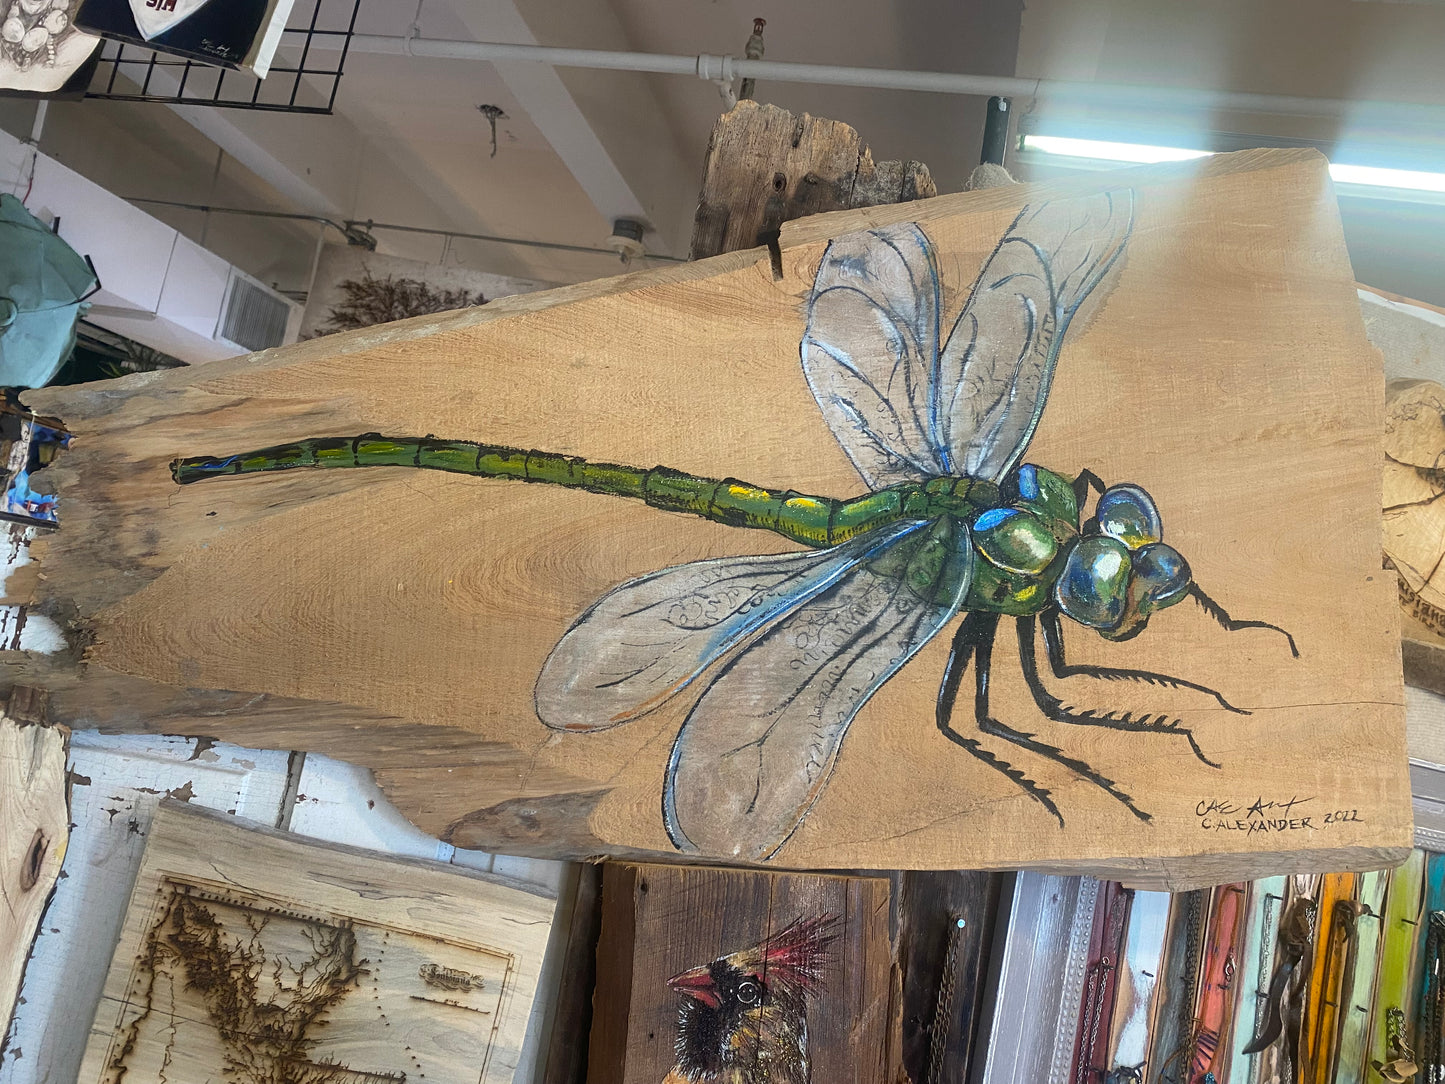 Dragonfly 2 Wood Engraving "One of a Kind"